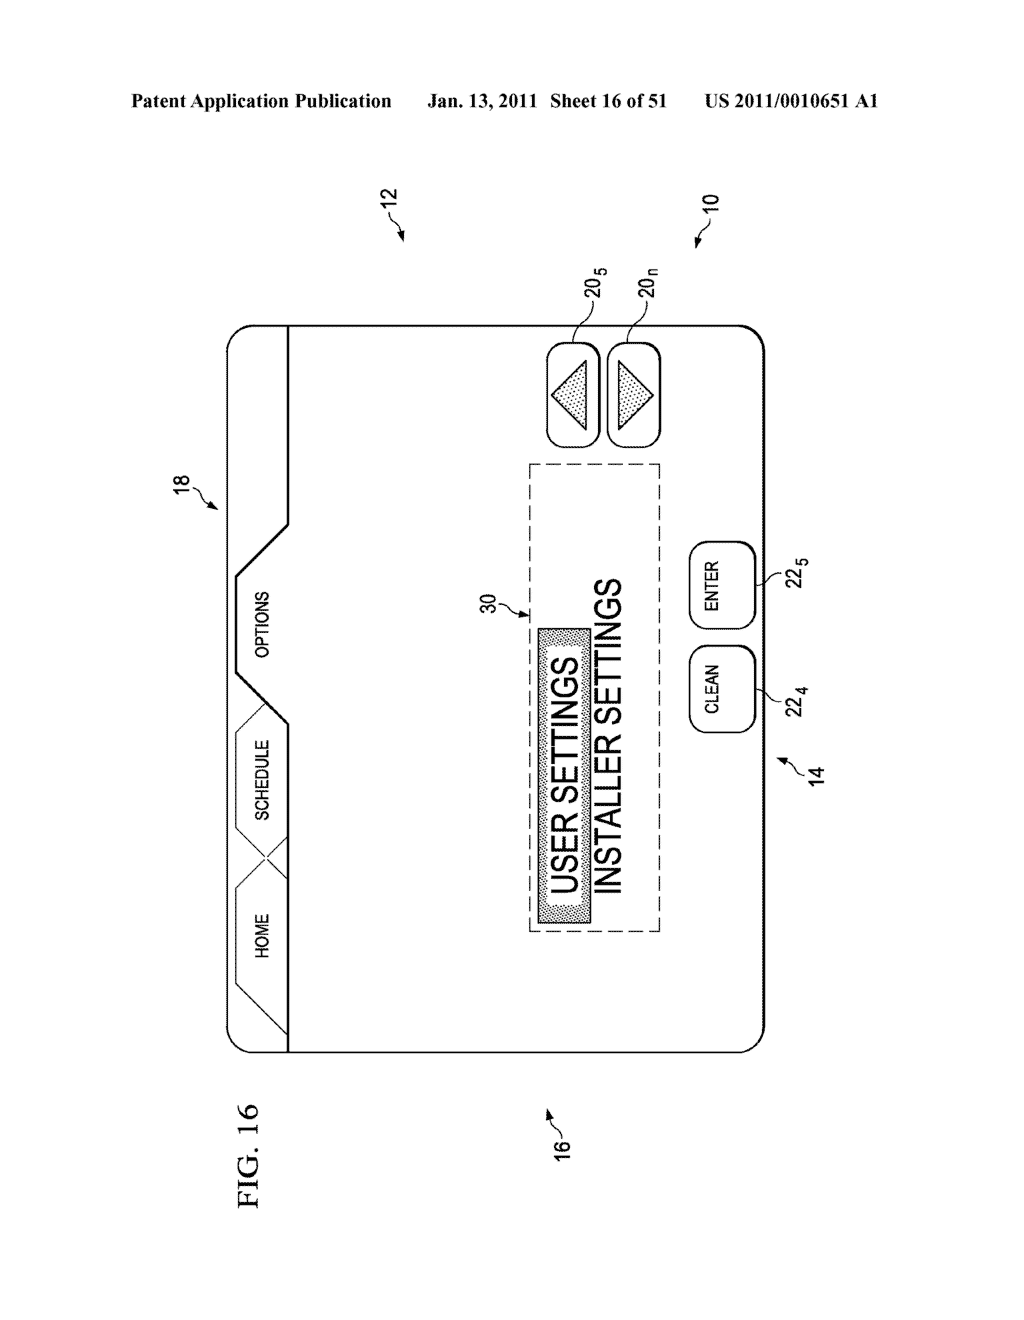 DISPLAY APPARATUS AND METHOD HAVING PARAMETER DISPLAY TOGGLE CAPABILITY FOR AN ENVIRONMENTAL CONTROL SYSTEM - diagram, schematic, and image 17